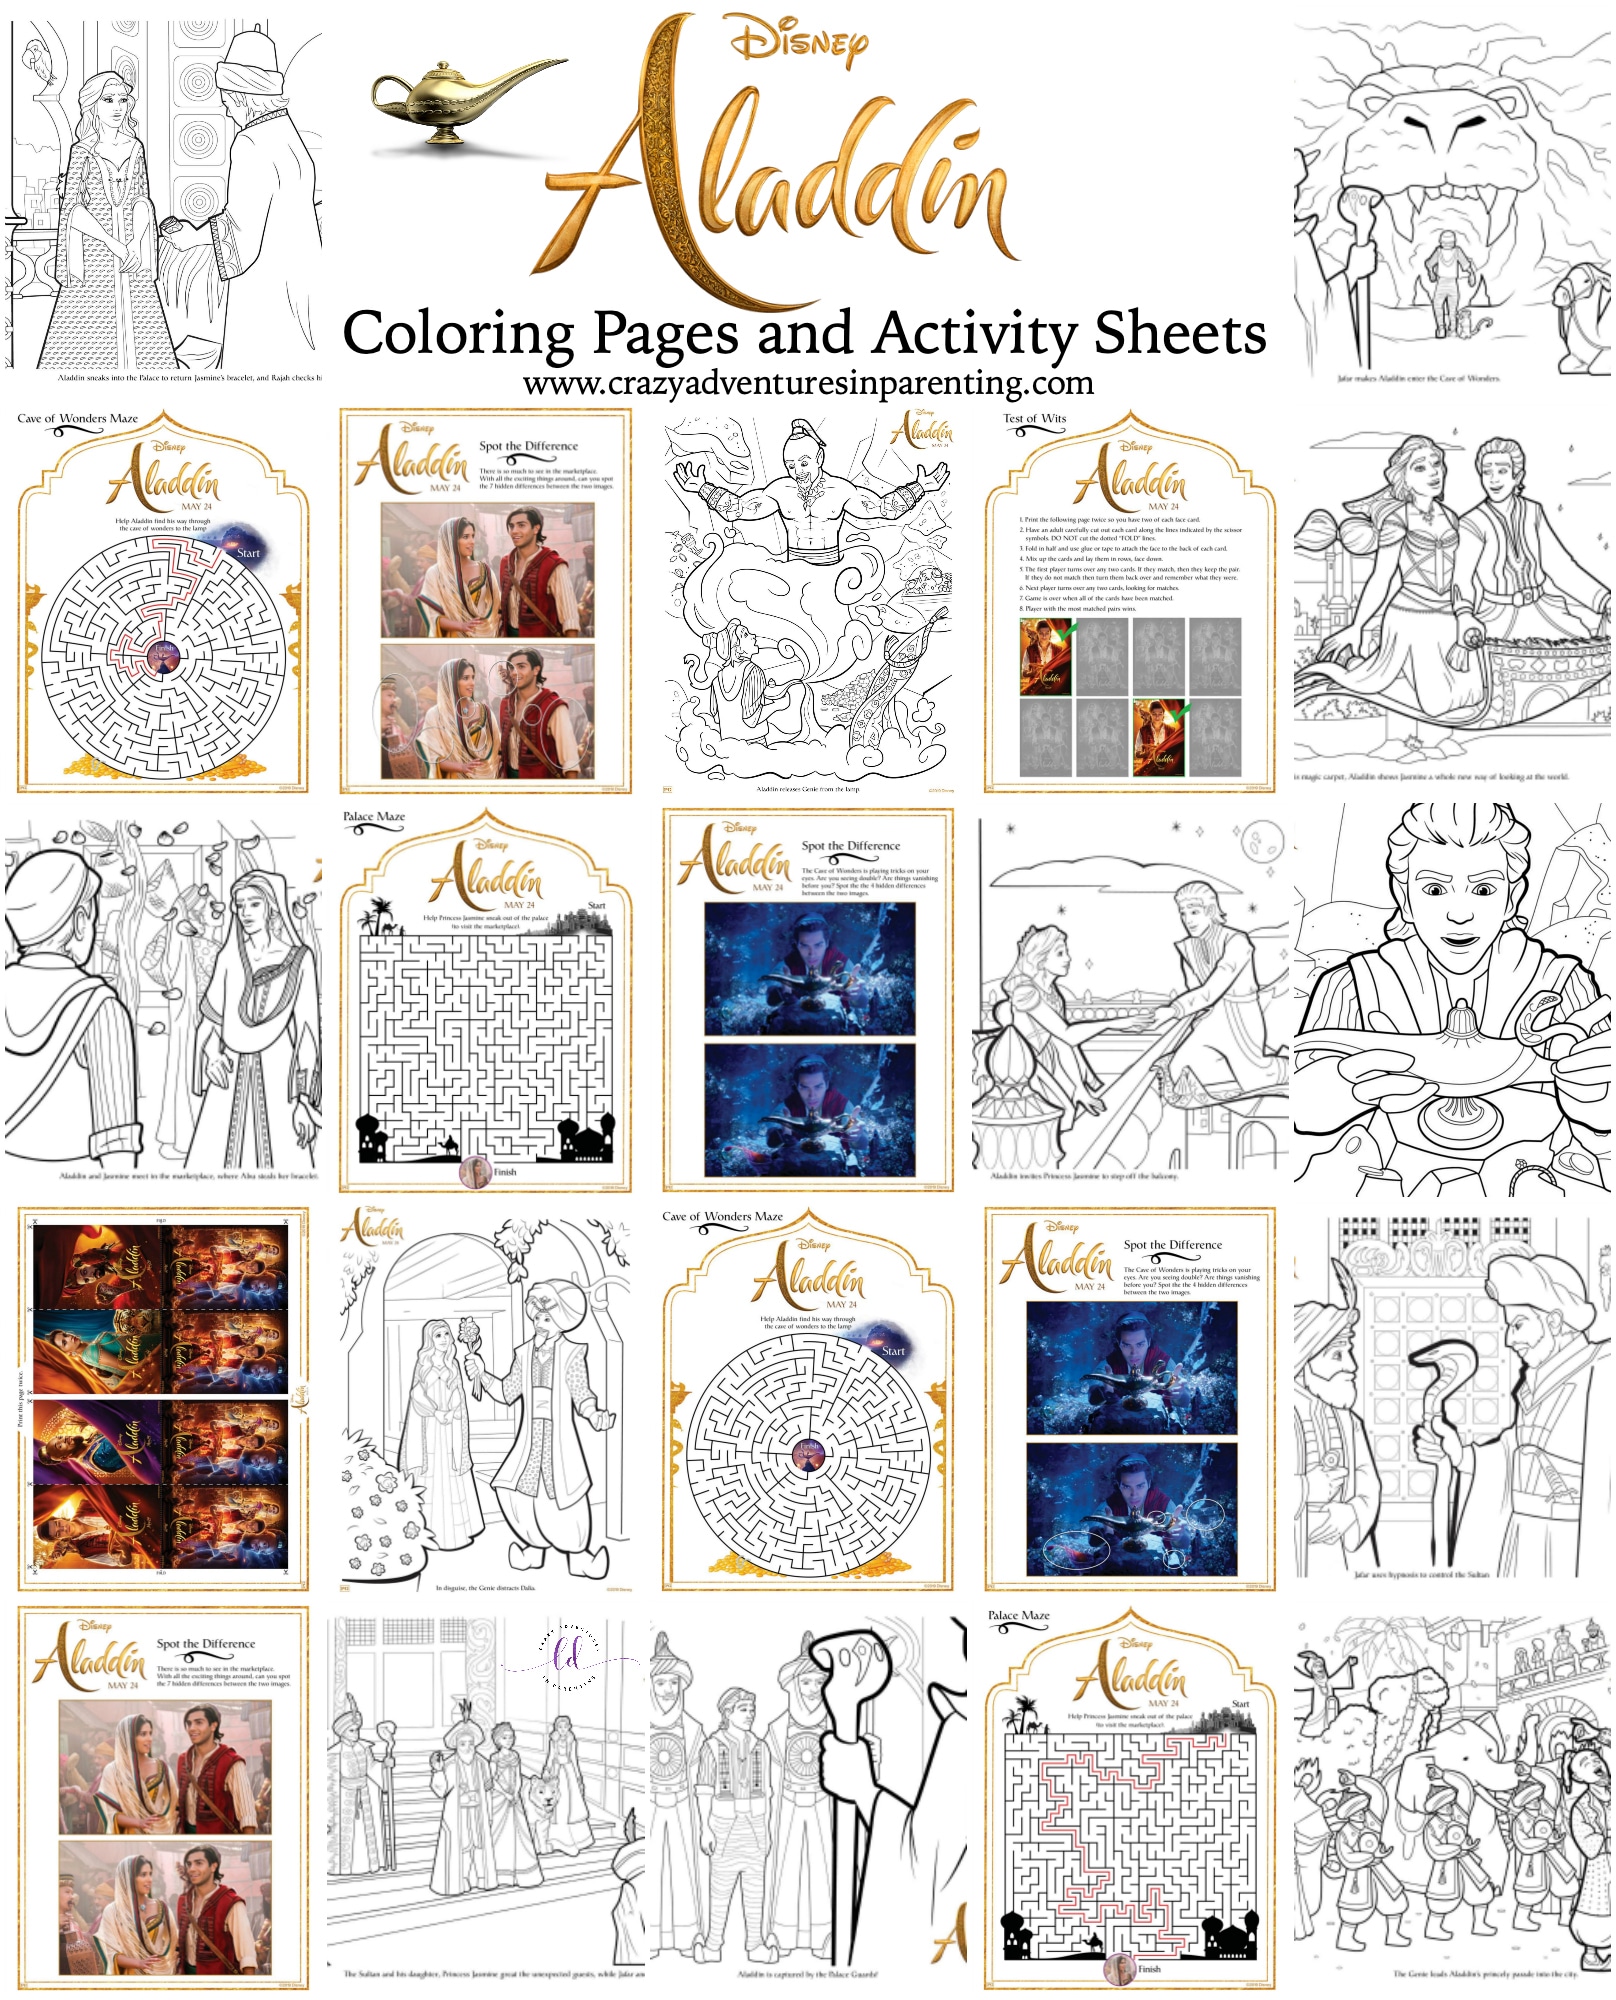 Aladdin Coloring Pages and Activity Sheets